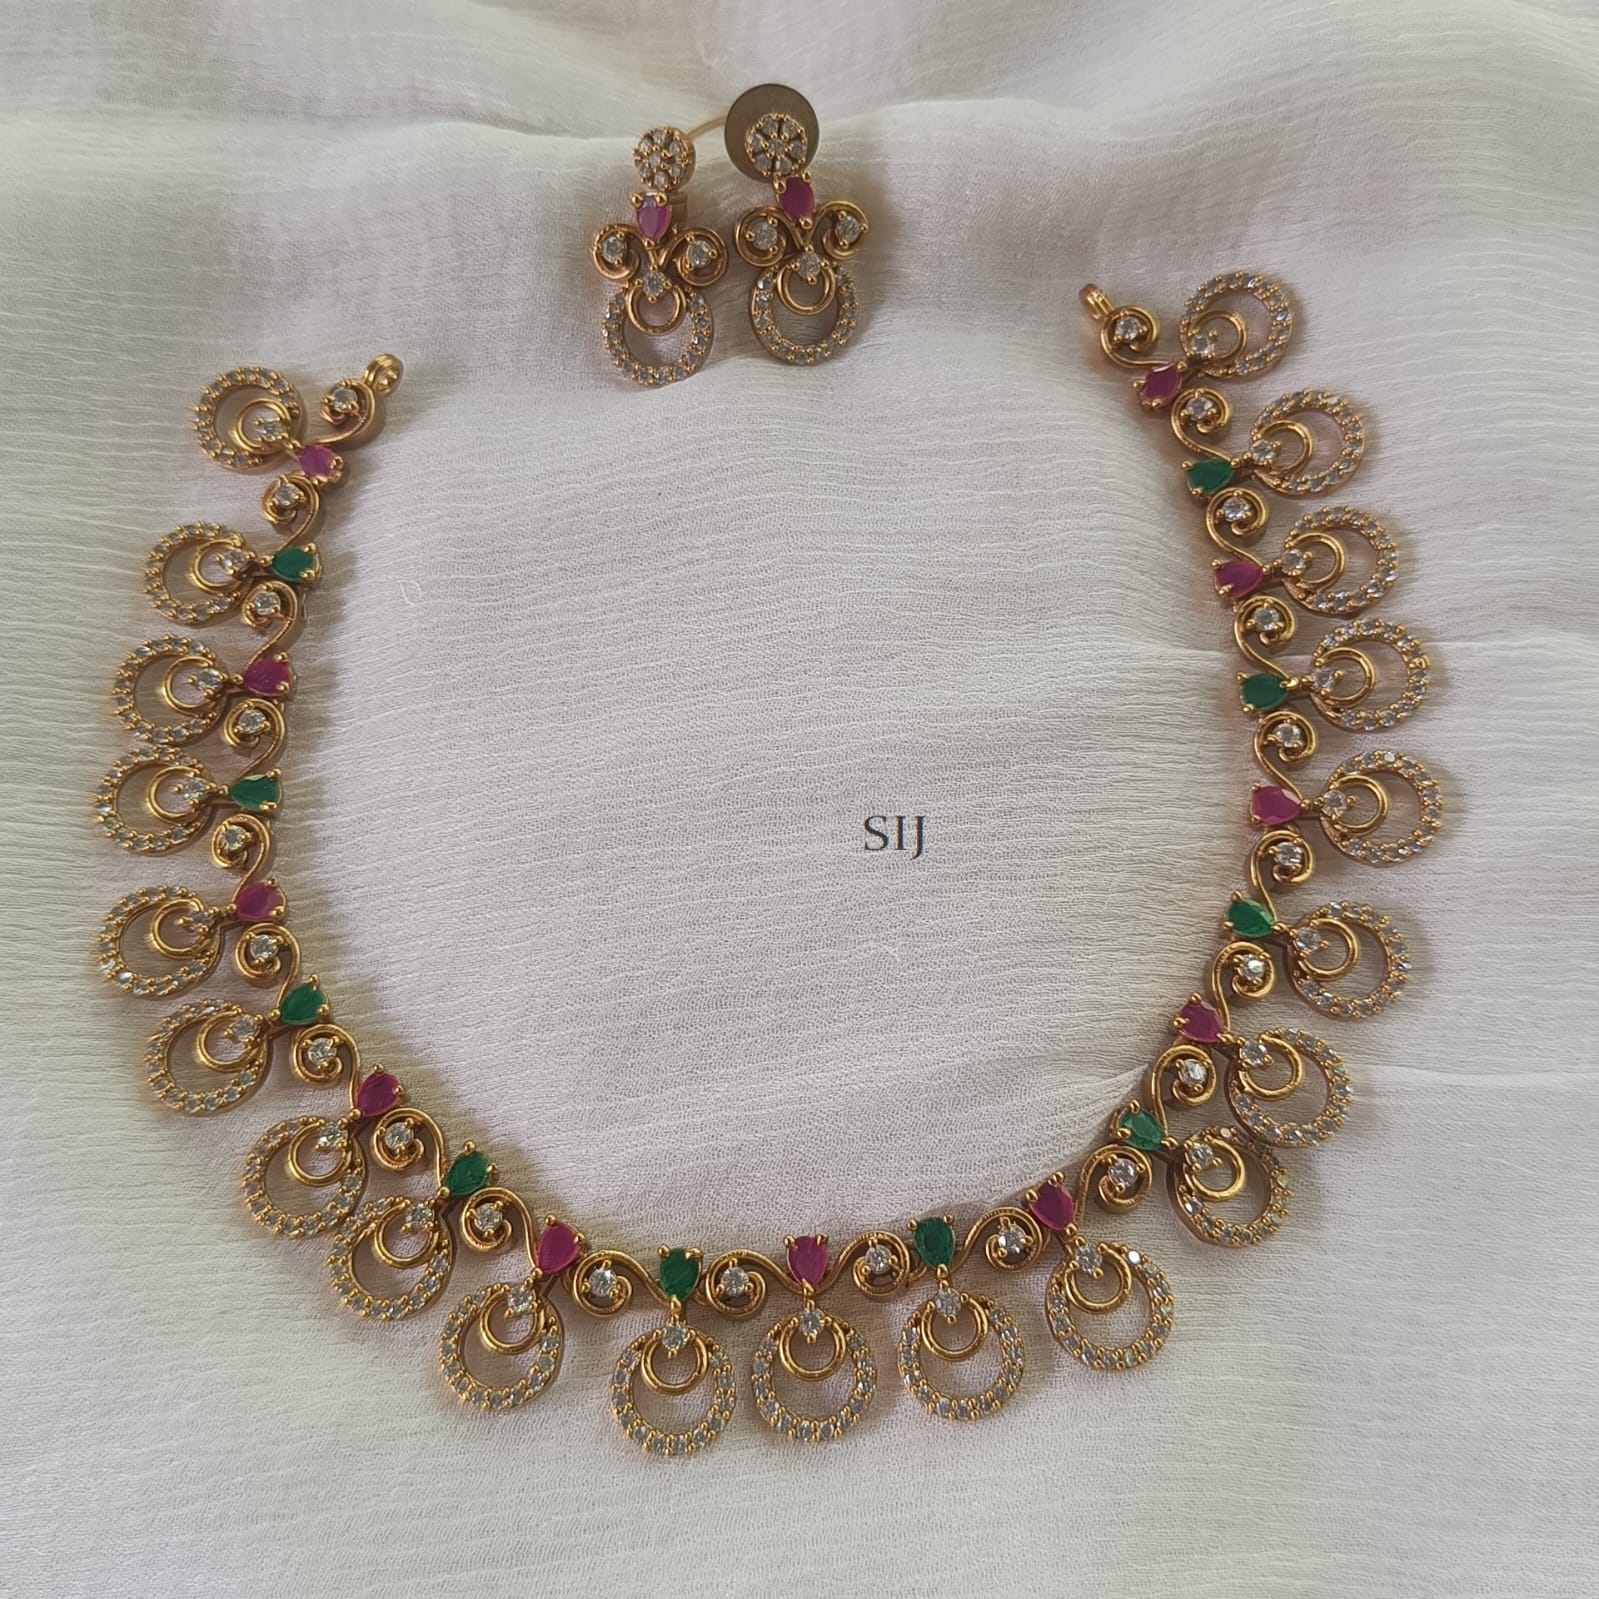 AD Necklace with Earrings - Pink with Green